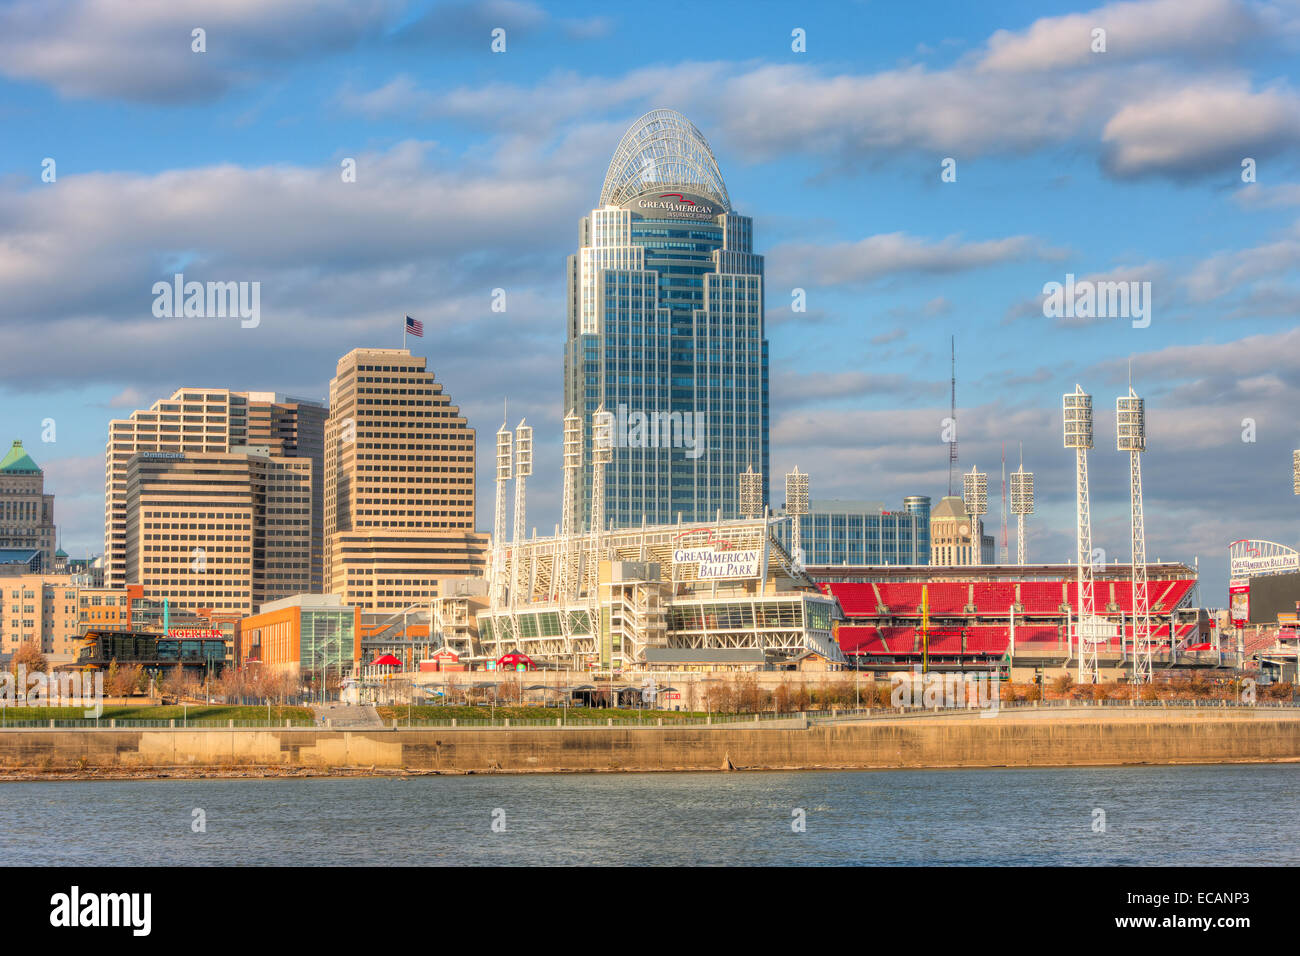 The skyline of Cincinnati, Ohio including the Great American tower and Ball Park. Stock Photo